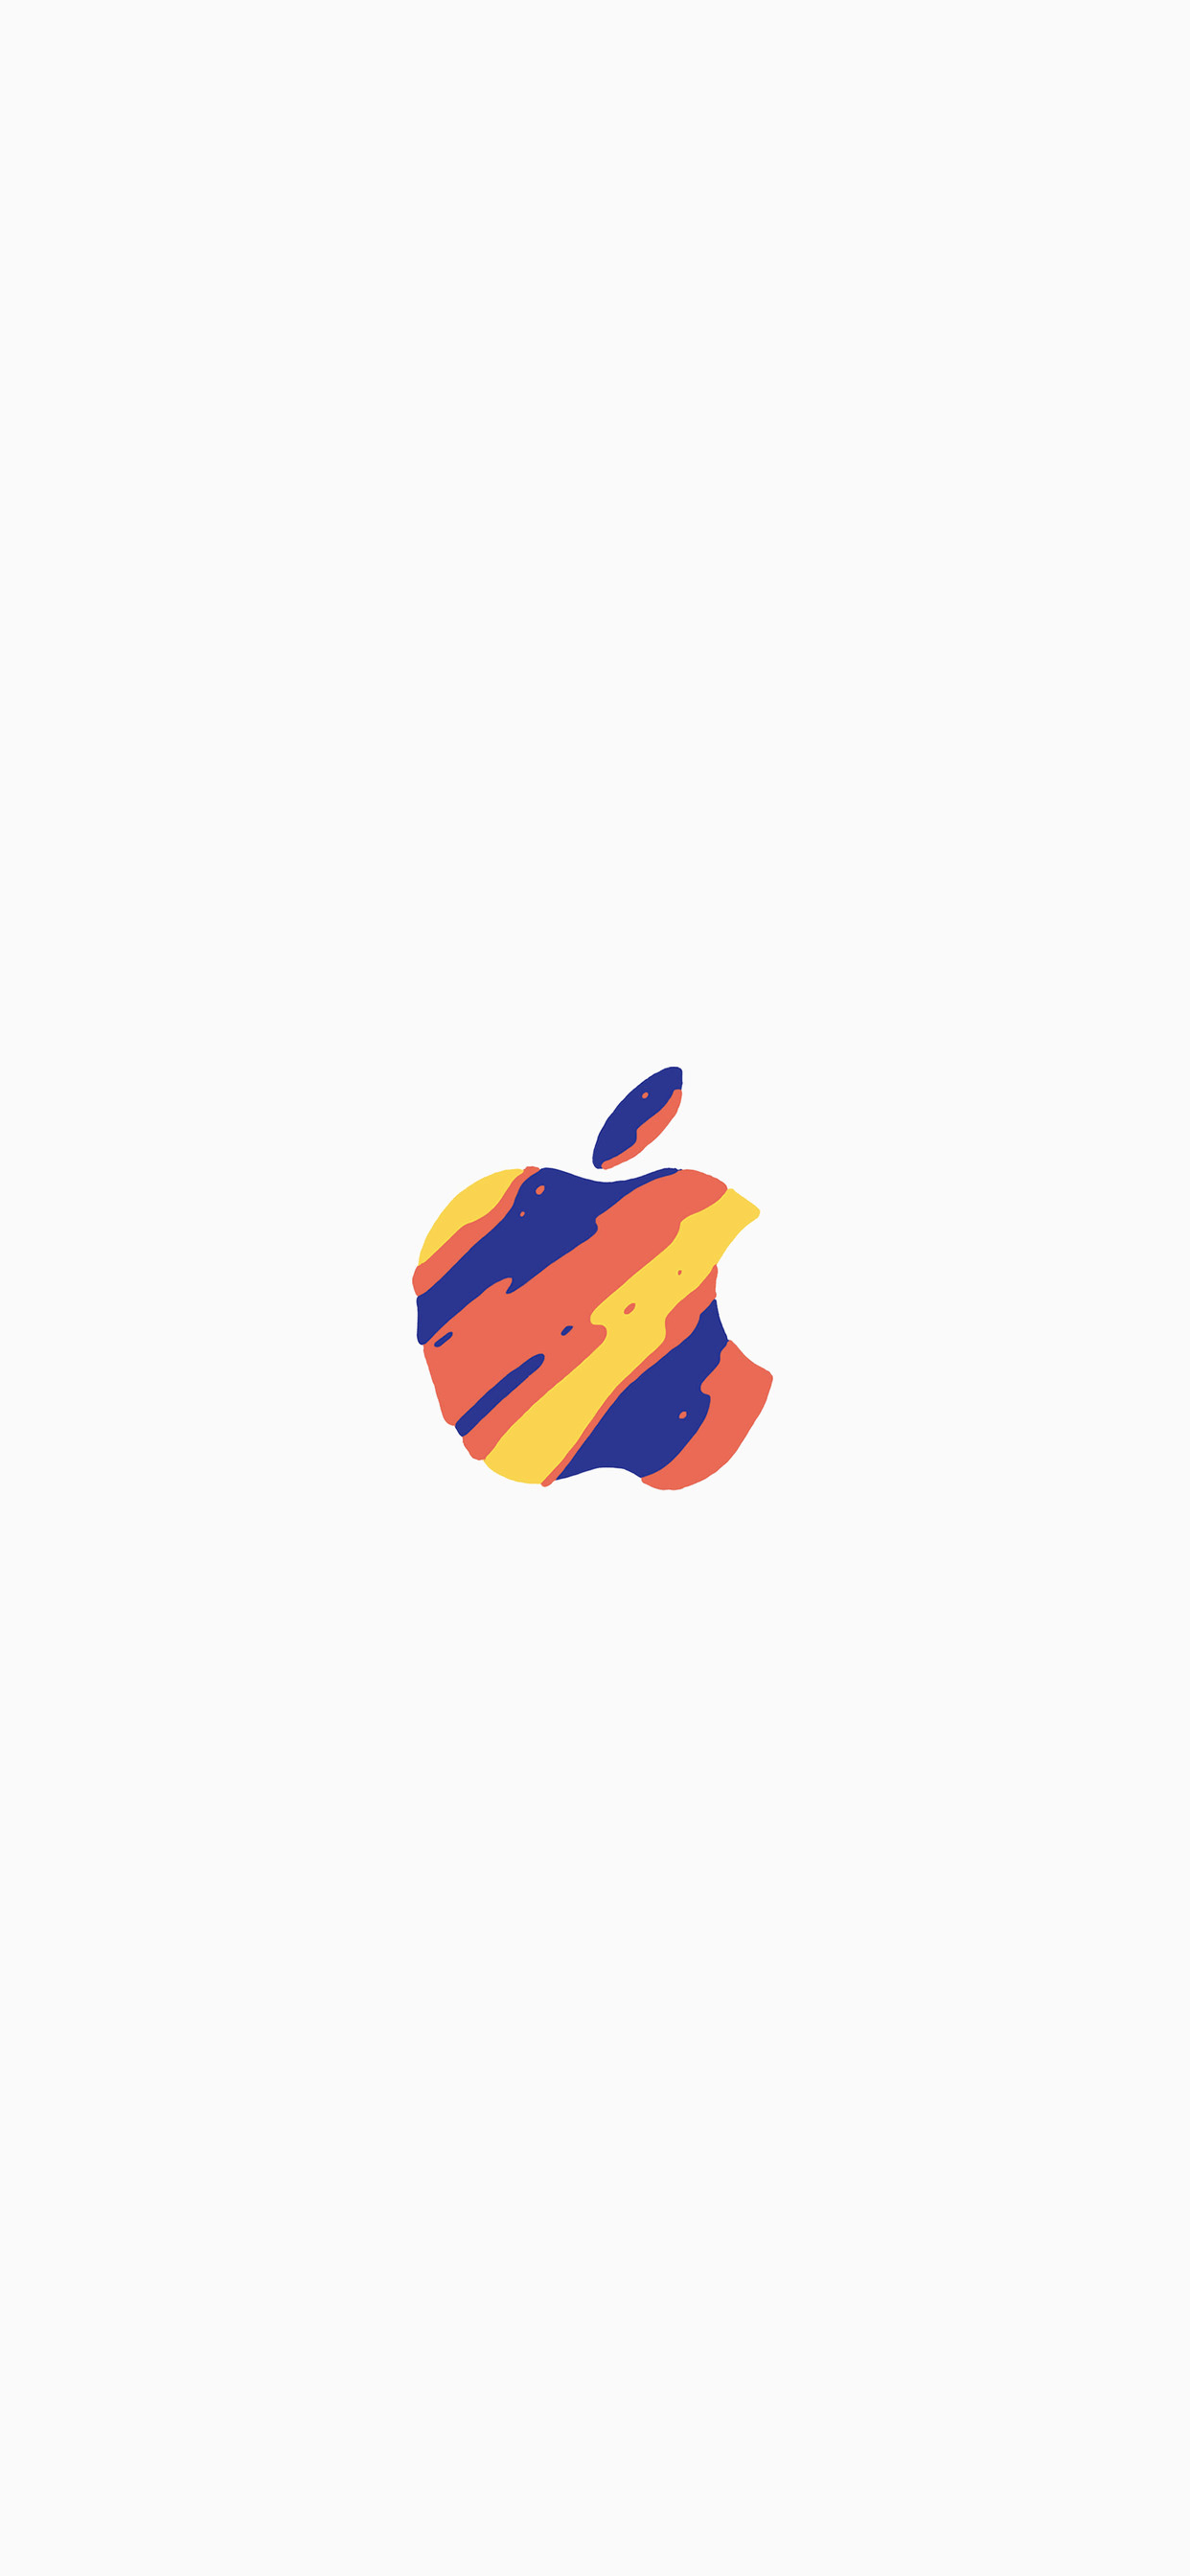 Apple's Logo - There's more in the making: 33 Apple logo wallpapers